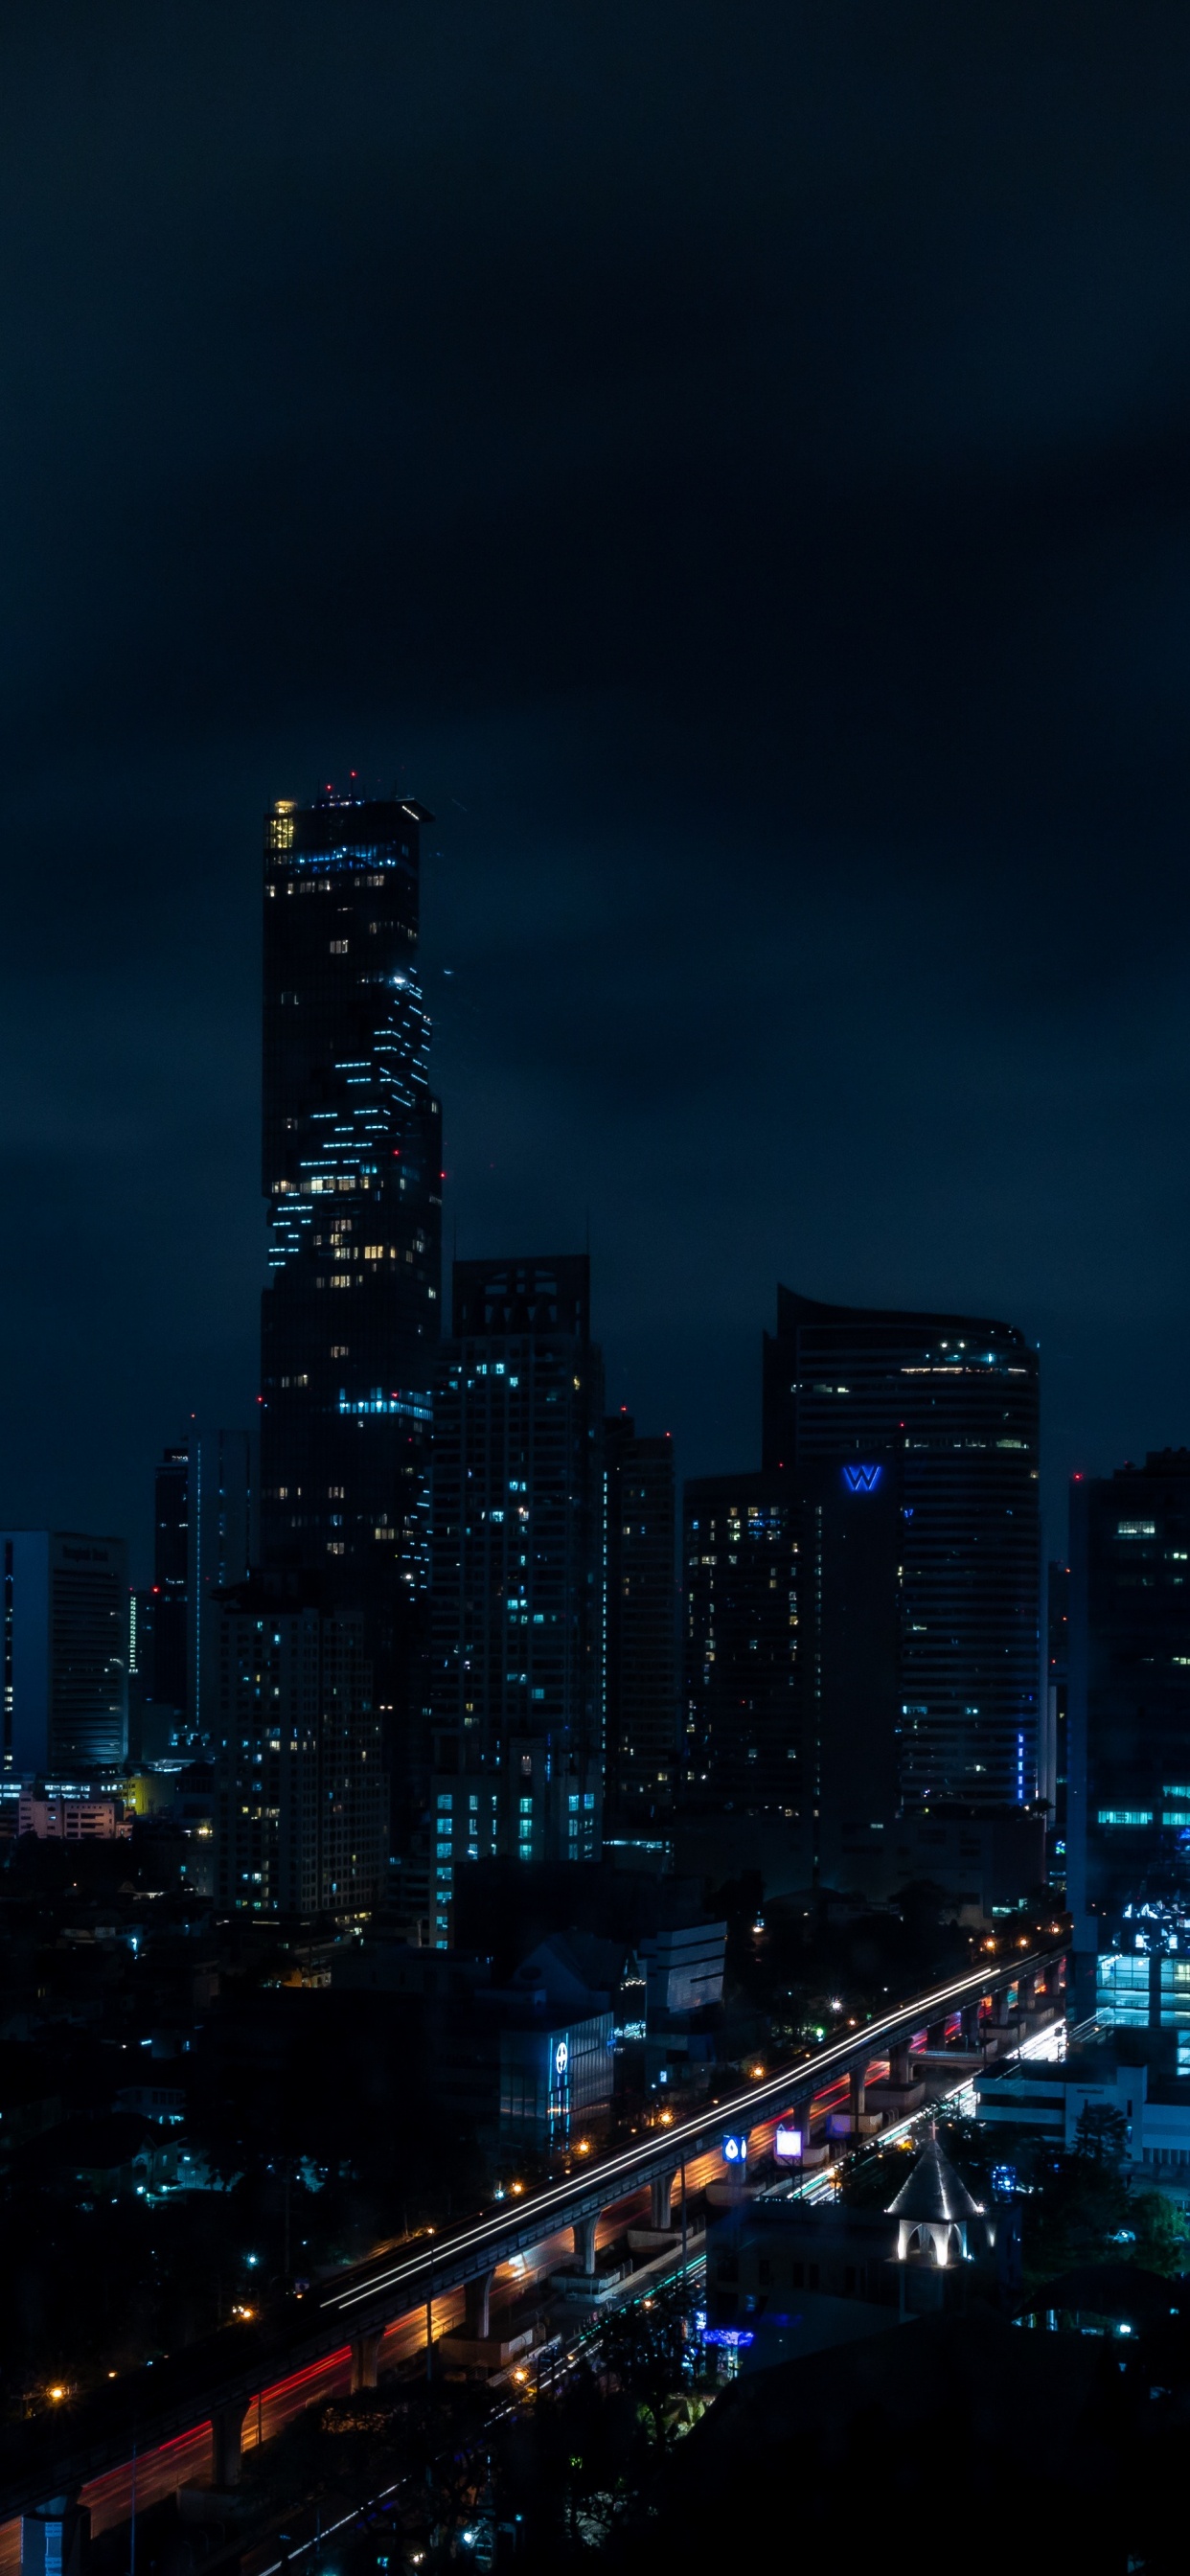 City Skyline During Night Time. Wallpaper in 1242x2688 Resolution